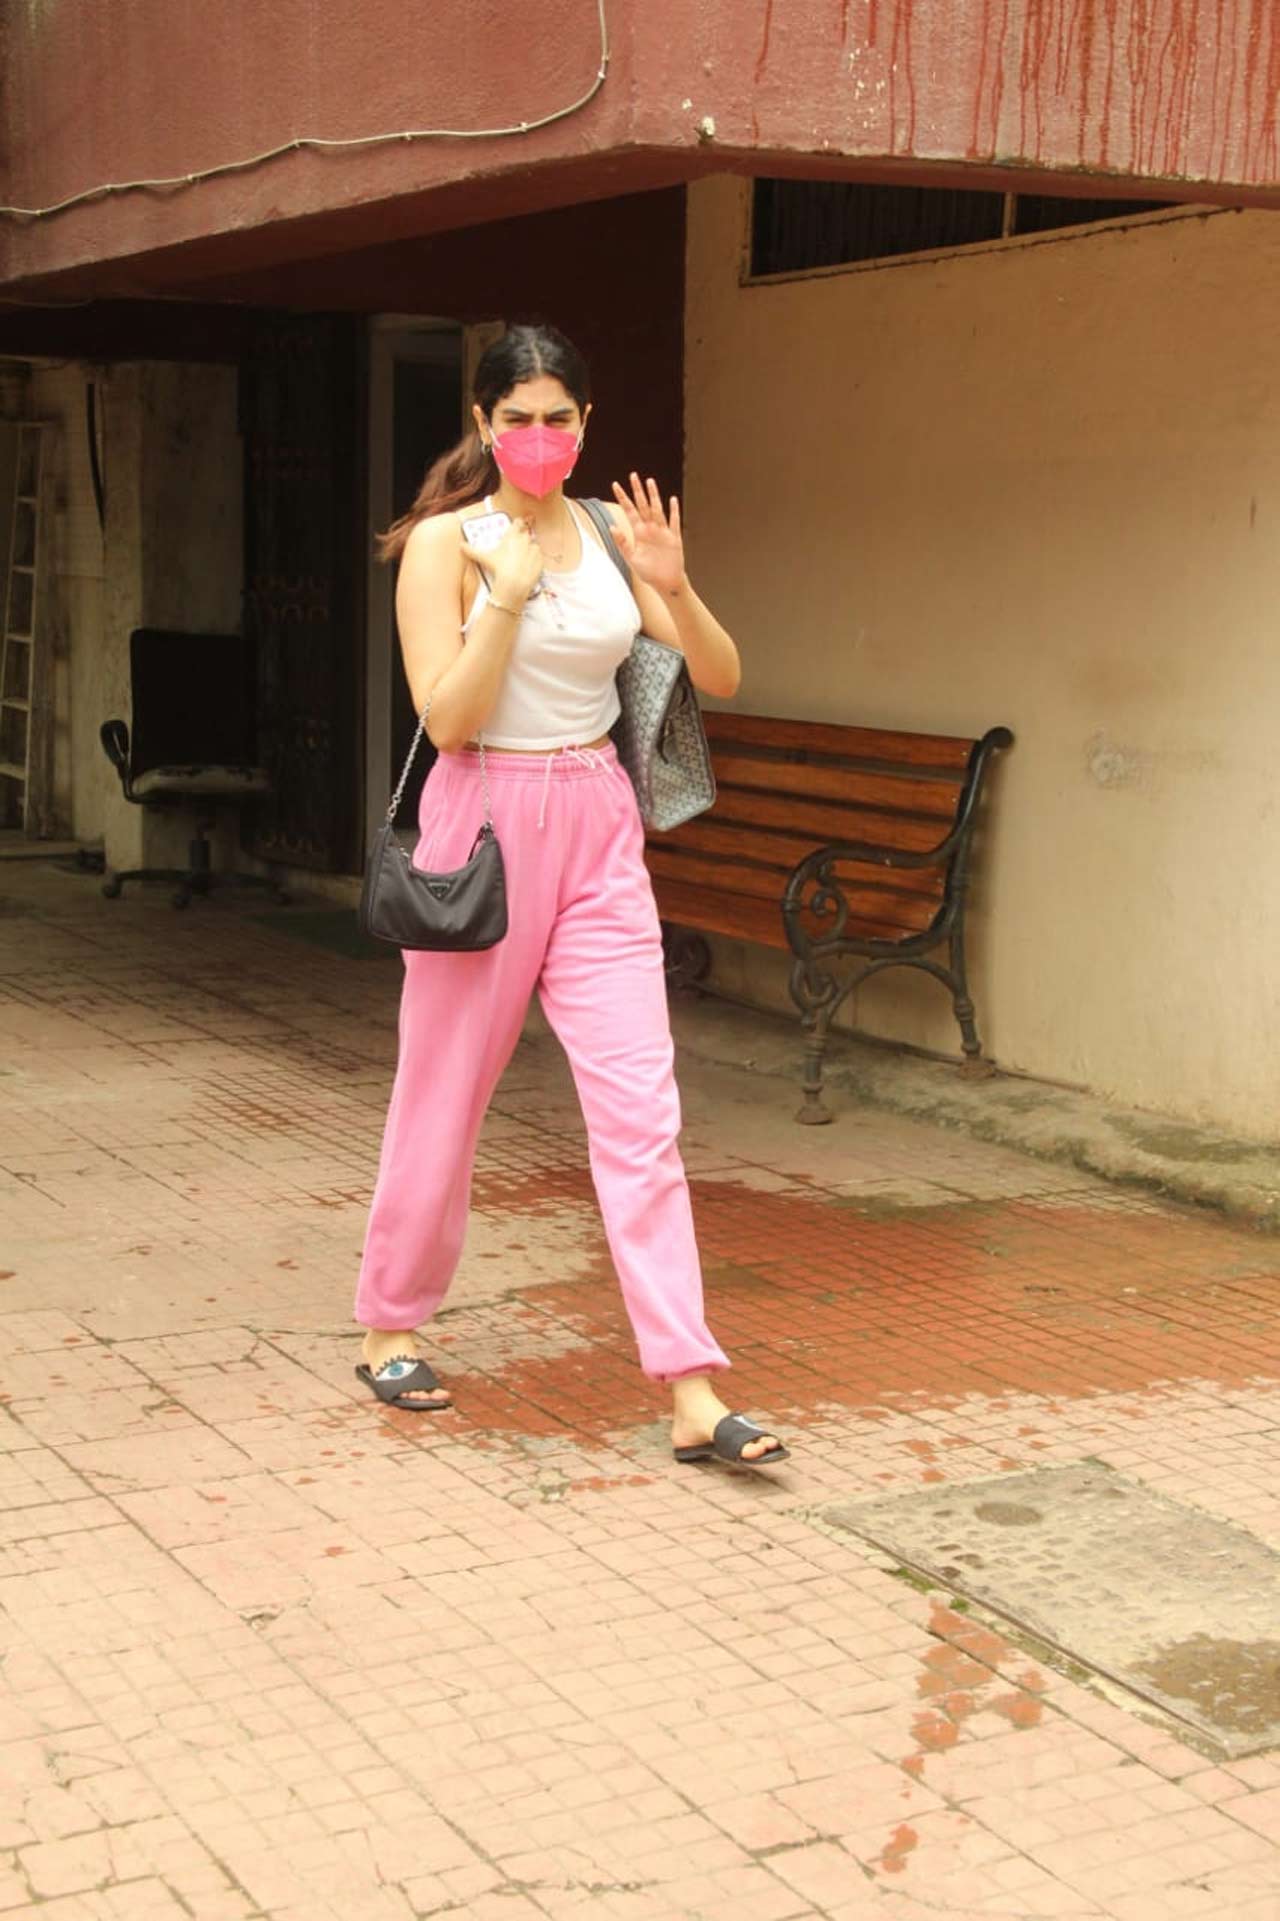 Khushi Kapoor, the next star kid who is said to kickstart her acting career soon, has been taking her workouts seriously and is often snapped at the gym.